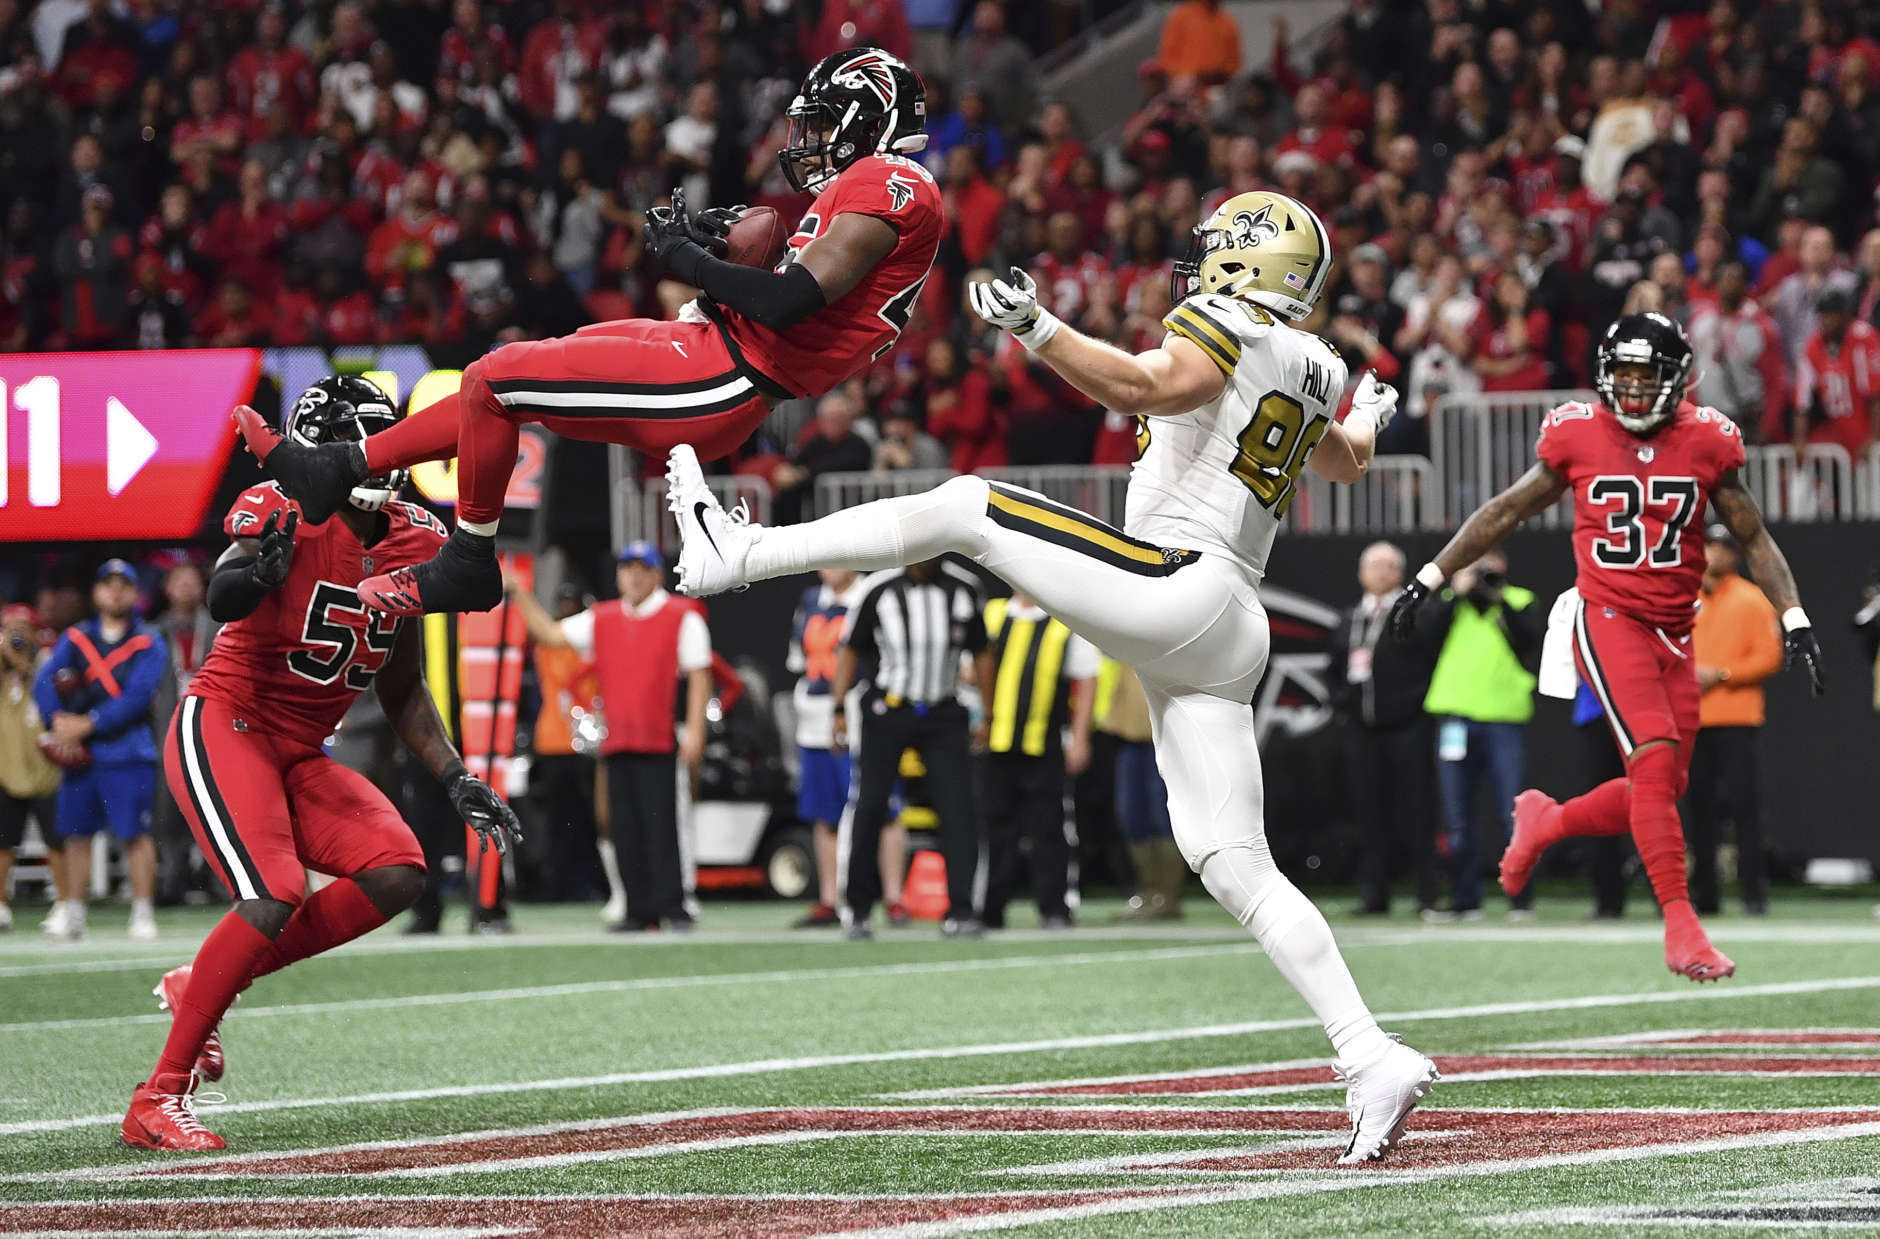 Atlanta Falcons middle linebacker Deion Jones (45) intercepts a ball in the end zone ahead of New Orleans Saints tight end Josh Hill (89) during the second half of an NFL football game, Thursday, Dec. 7, 2017, in Atlanta. (AP Photo/Danny Karnik)